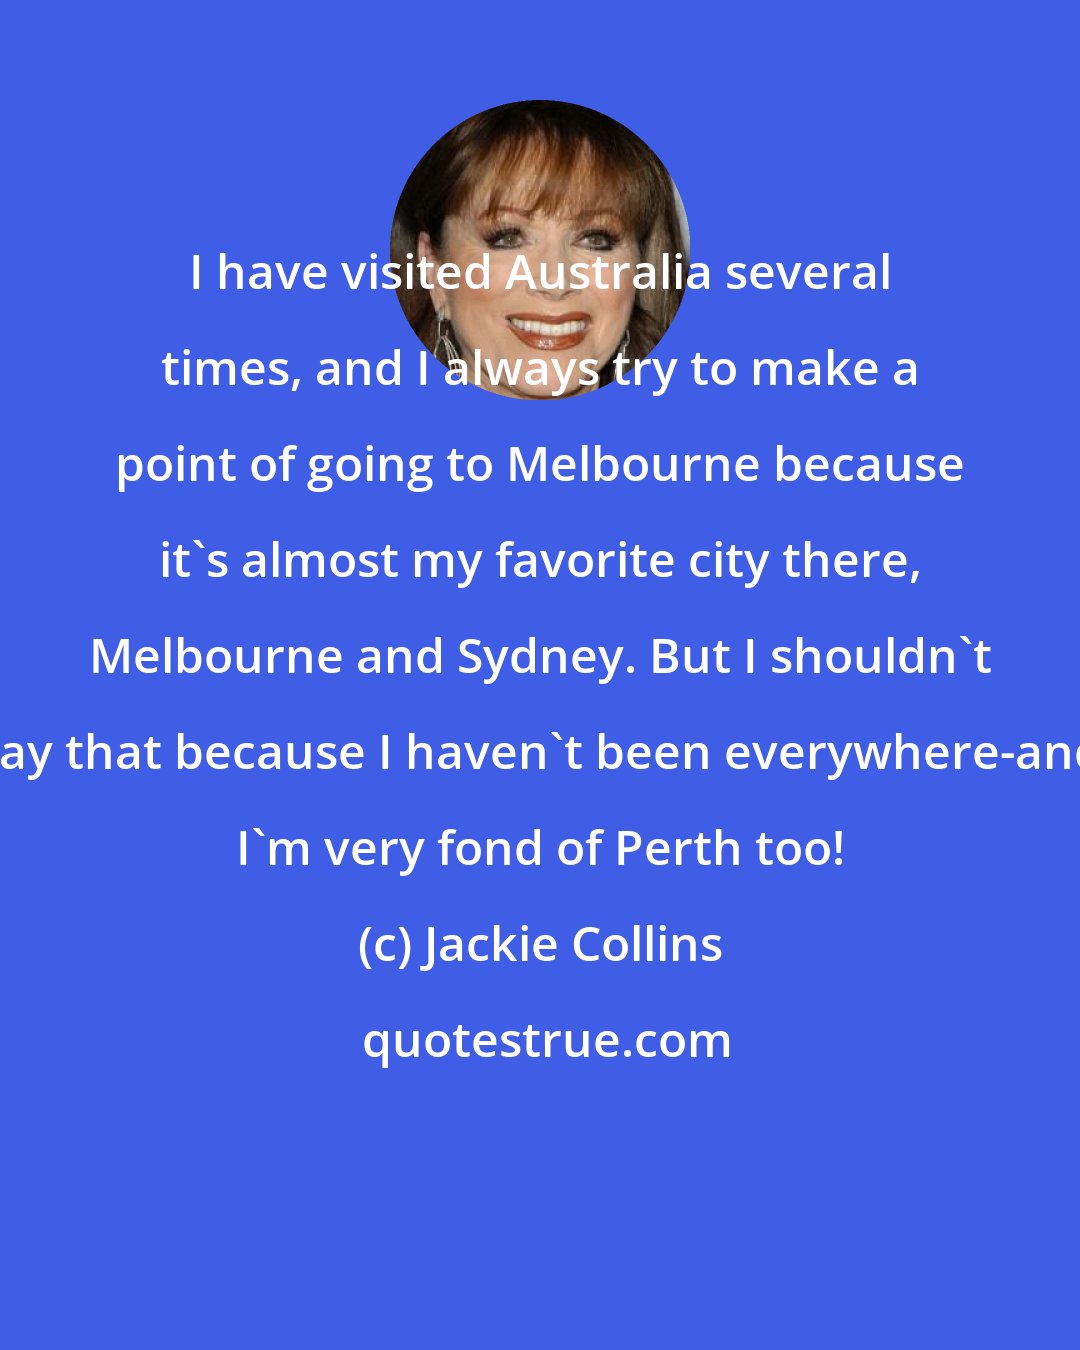 Jackie Collins: I have visited Australia several times, and I always try to make a point of going to Melbourne because it's almost my favorite city there, Melbourne and Sydney. But I shouldn't say that because I haven't been everywhere-and I'm very fond of Perth too!